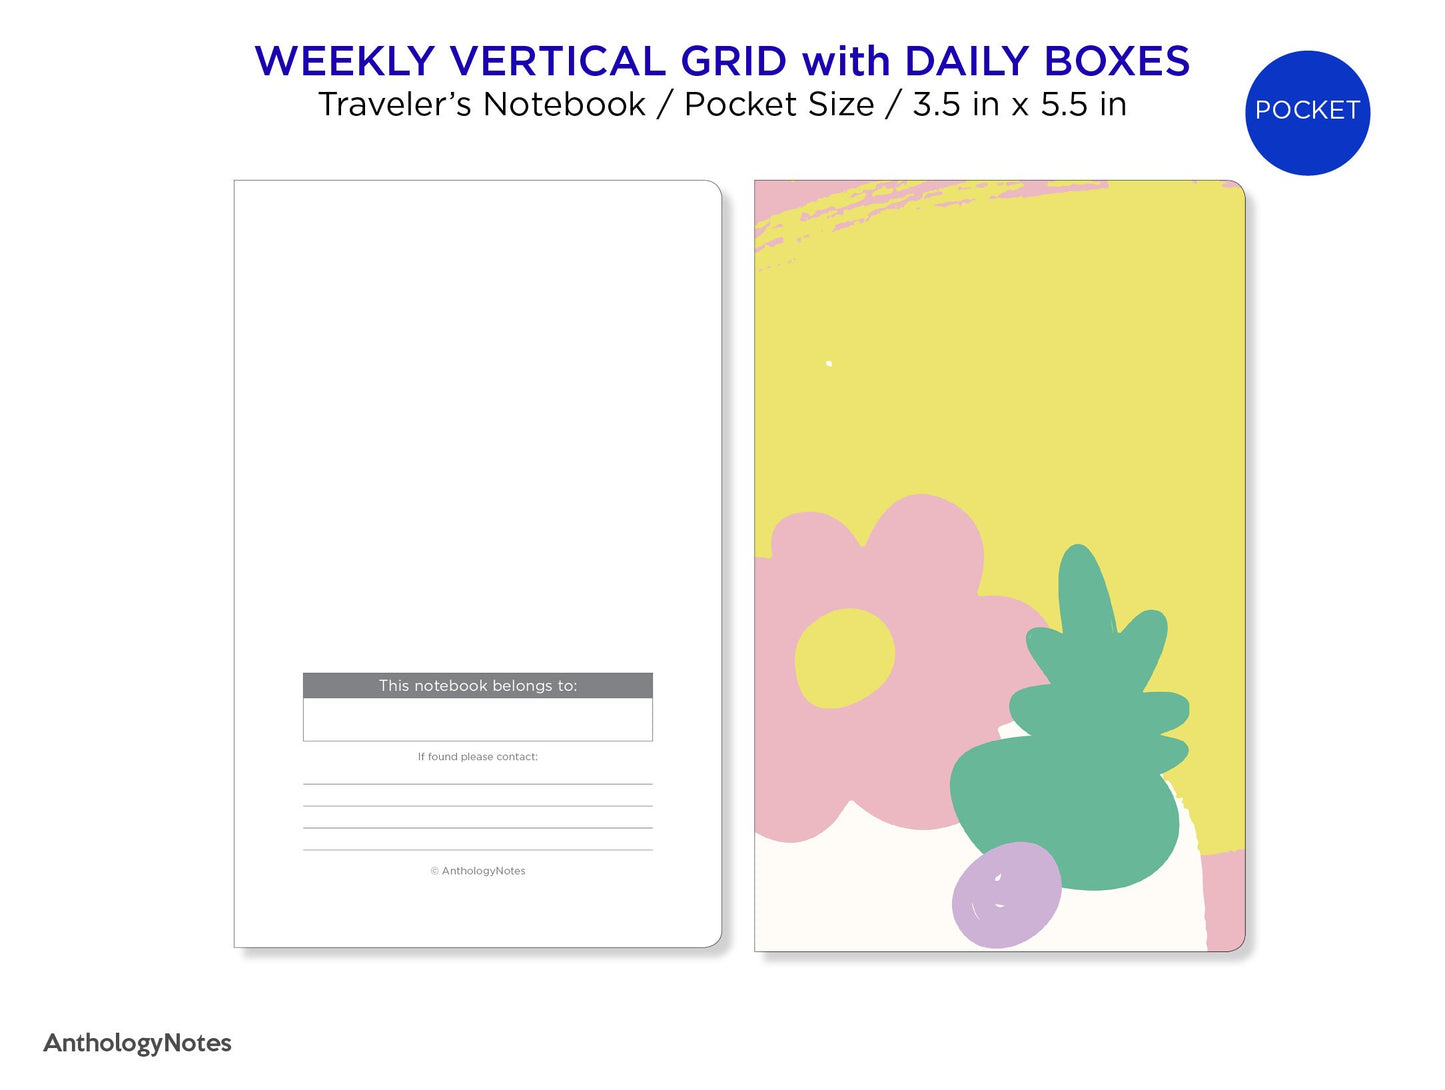 TN Pocket Weekly Vertical GRID with DAILY Boxes Printable Traveler's Notebook Insert